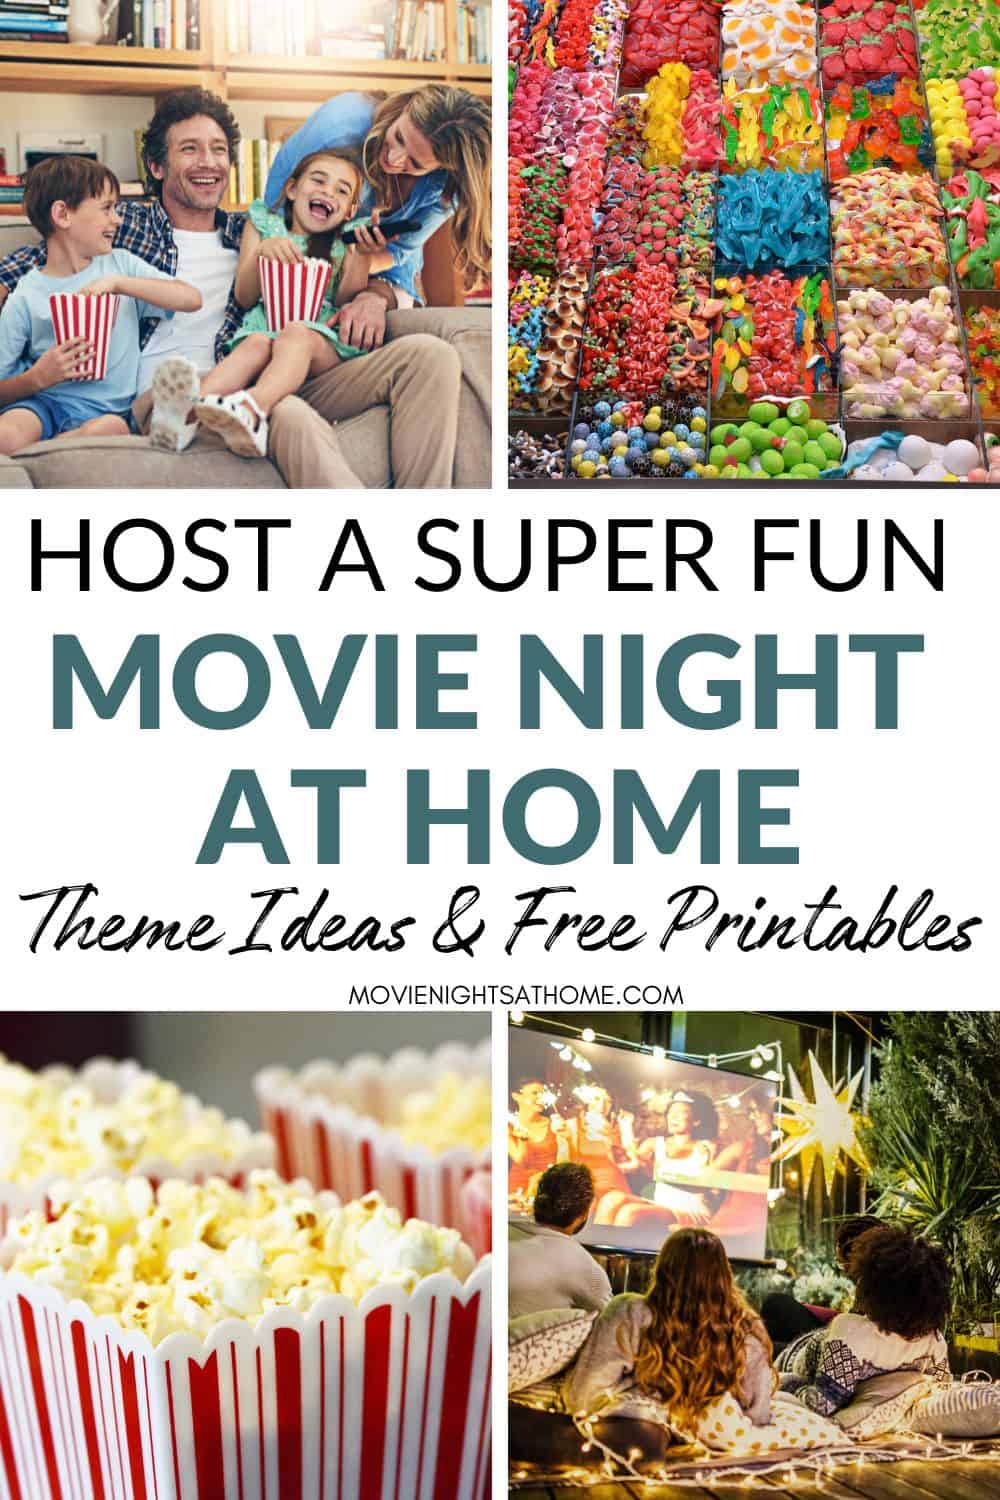 collage of 4 movie themed photos - one family watching a movie, candy, popcorn in buckets, and a group of friends watching a movie outside - text overlay says Host a Super Fun Movie Night at Home Free Themes and Printables